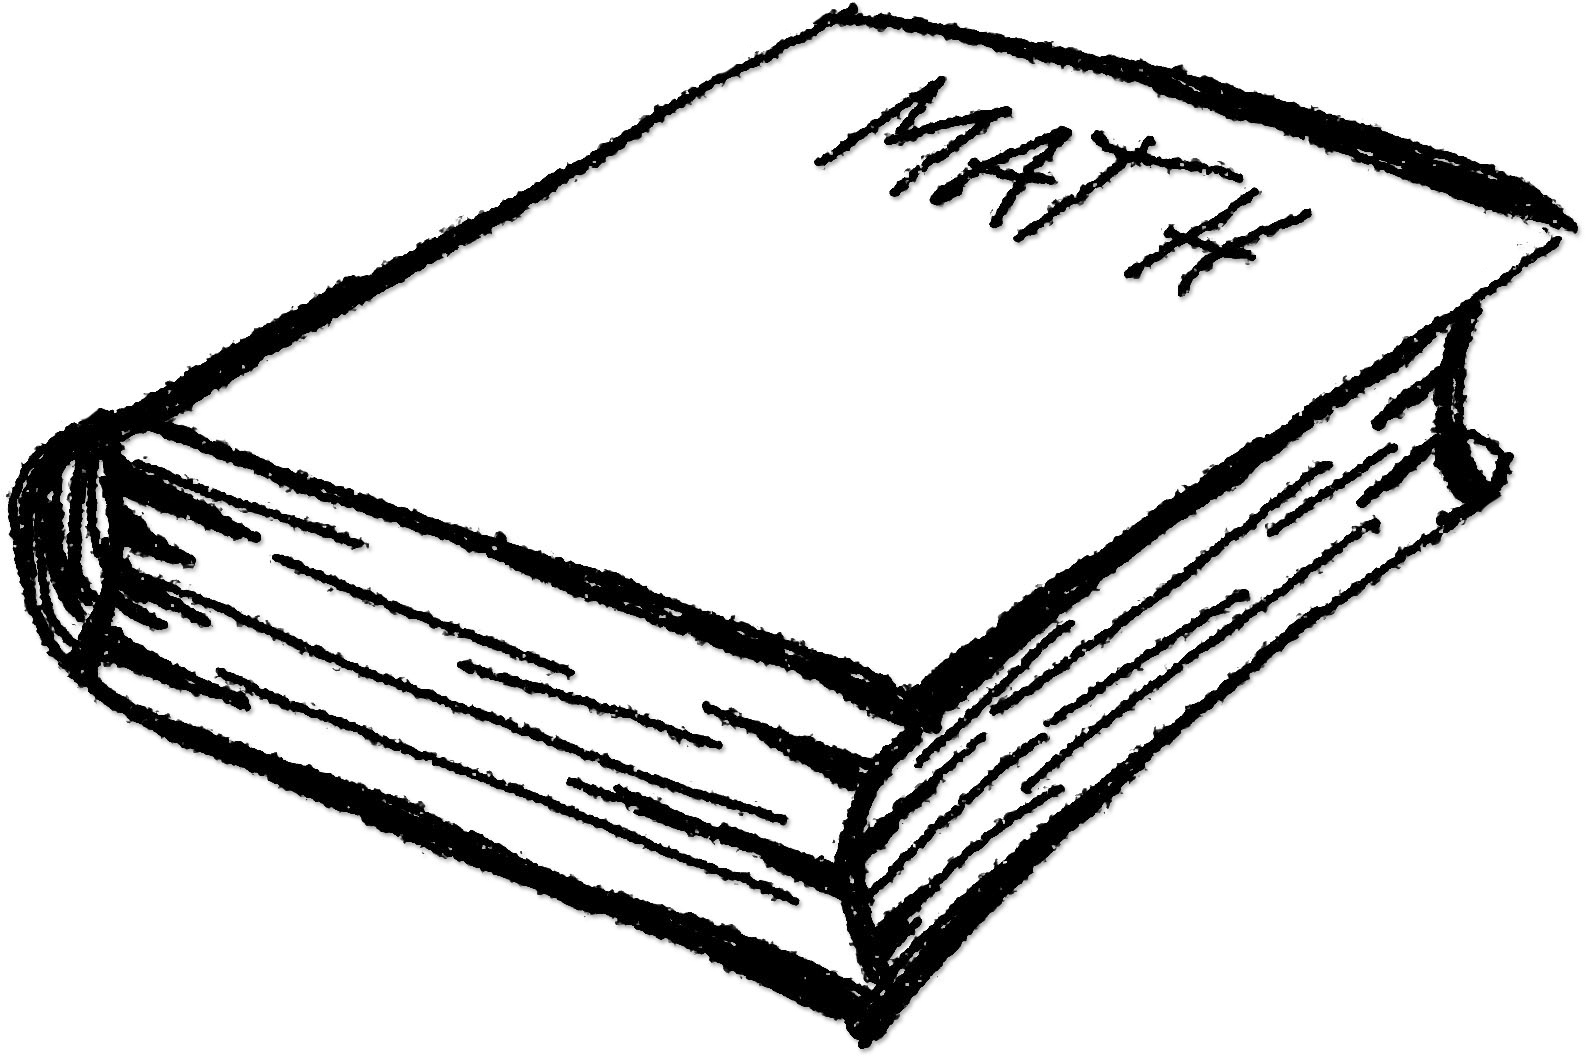 A Black And White Image Of A Book